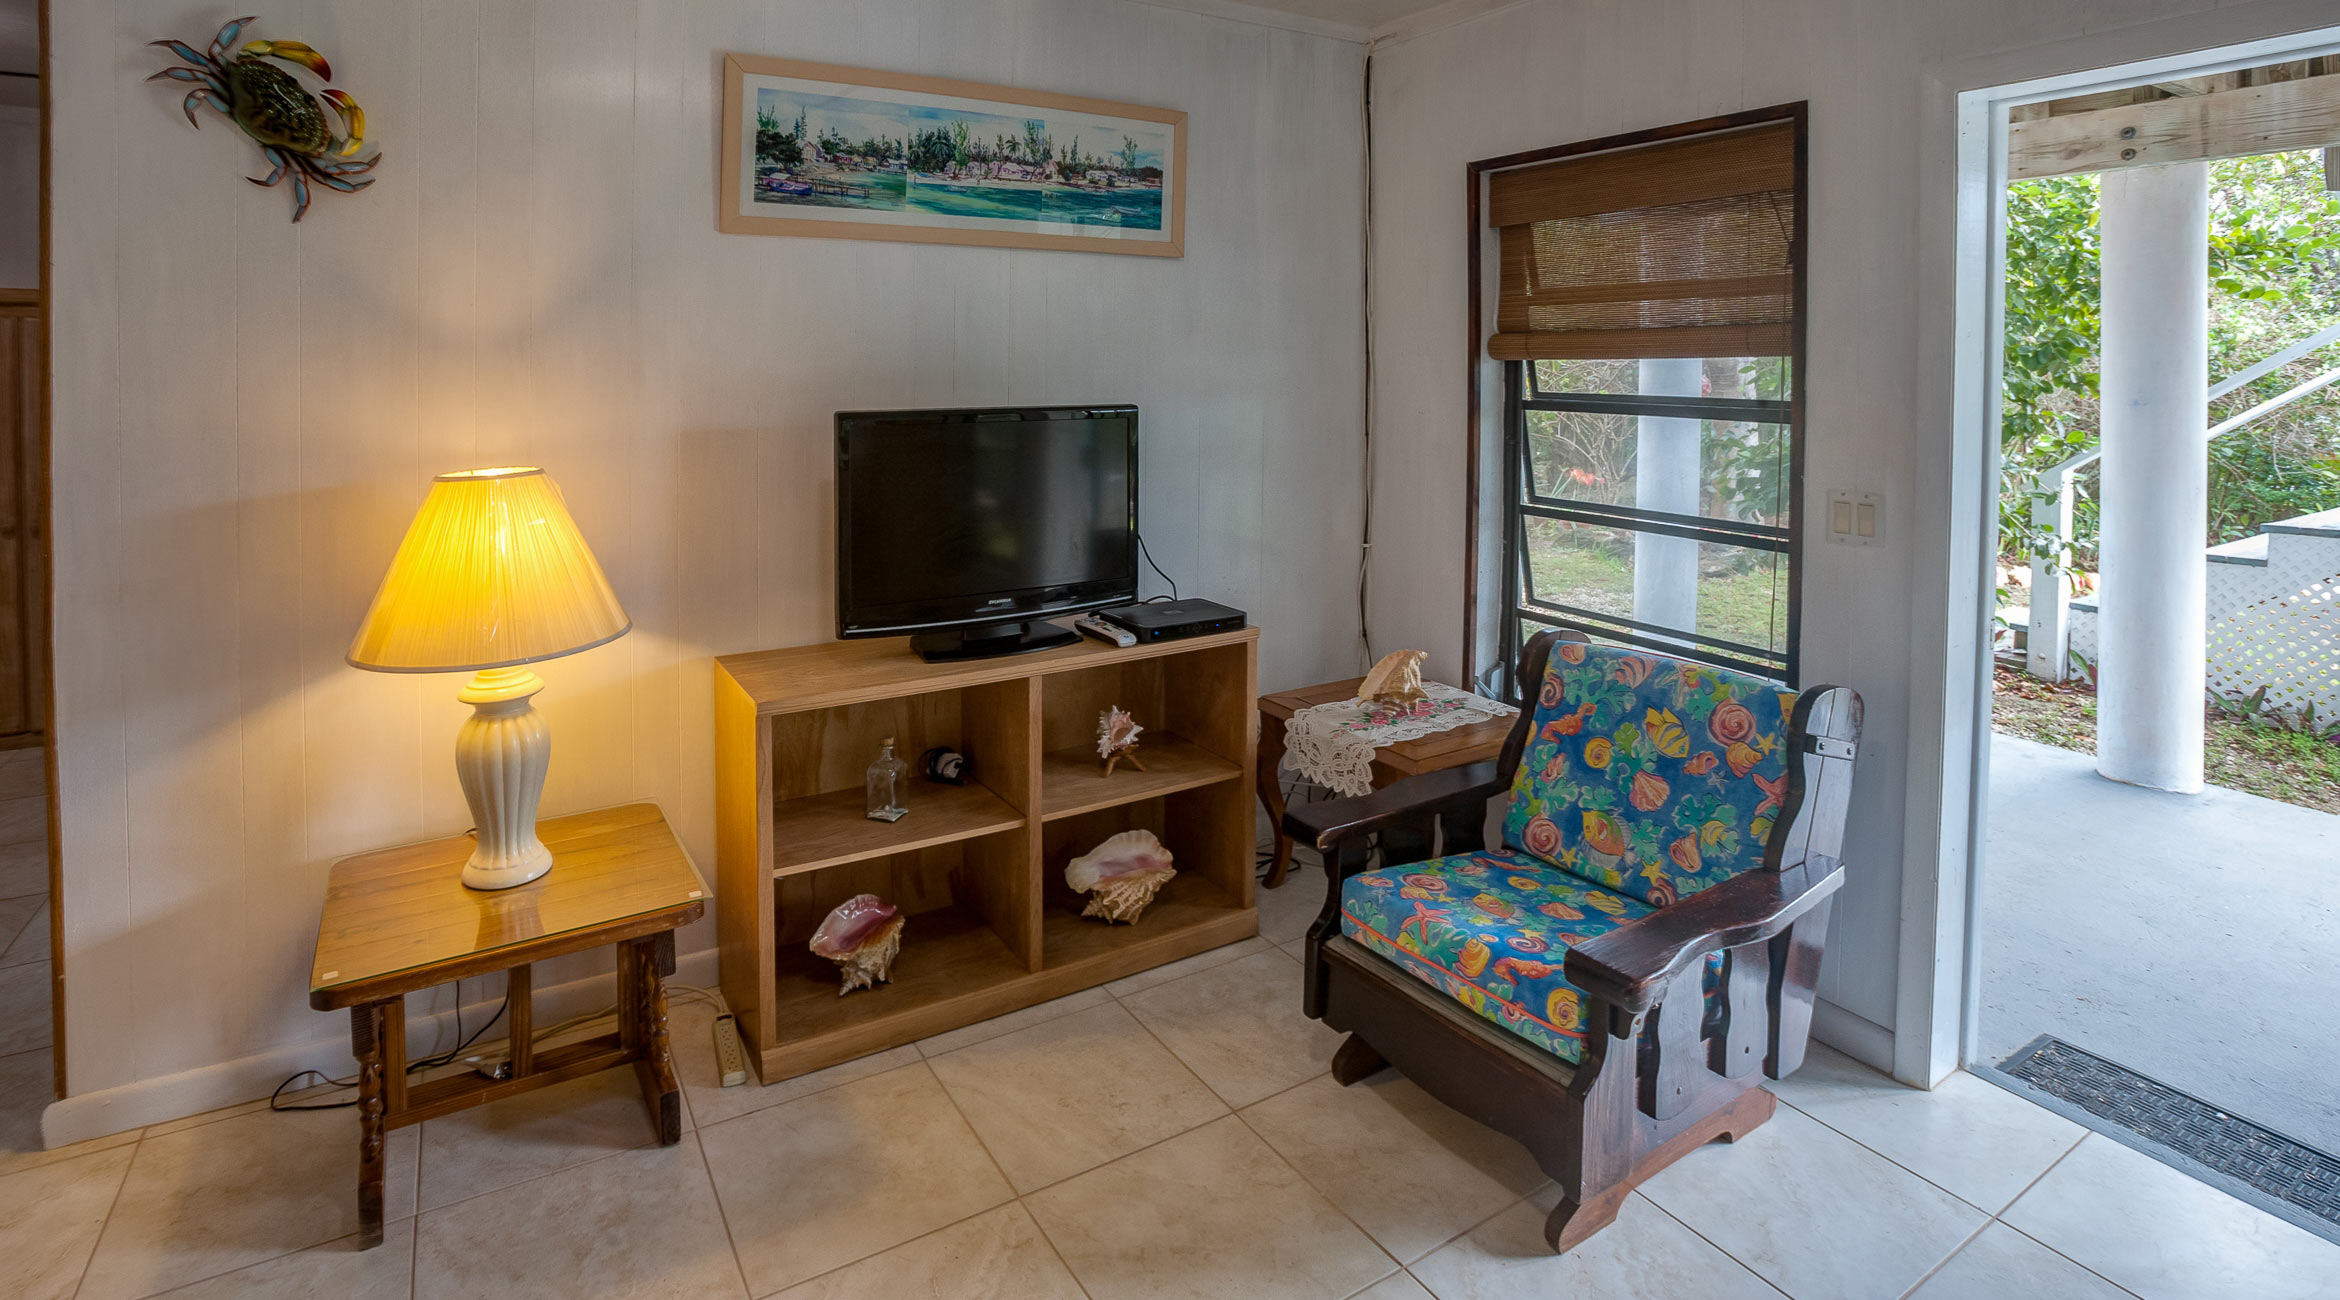 My Recluse Vacation Rental on Great Guana Cay